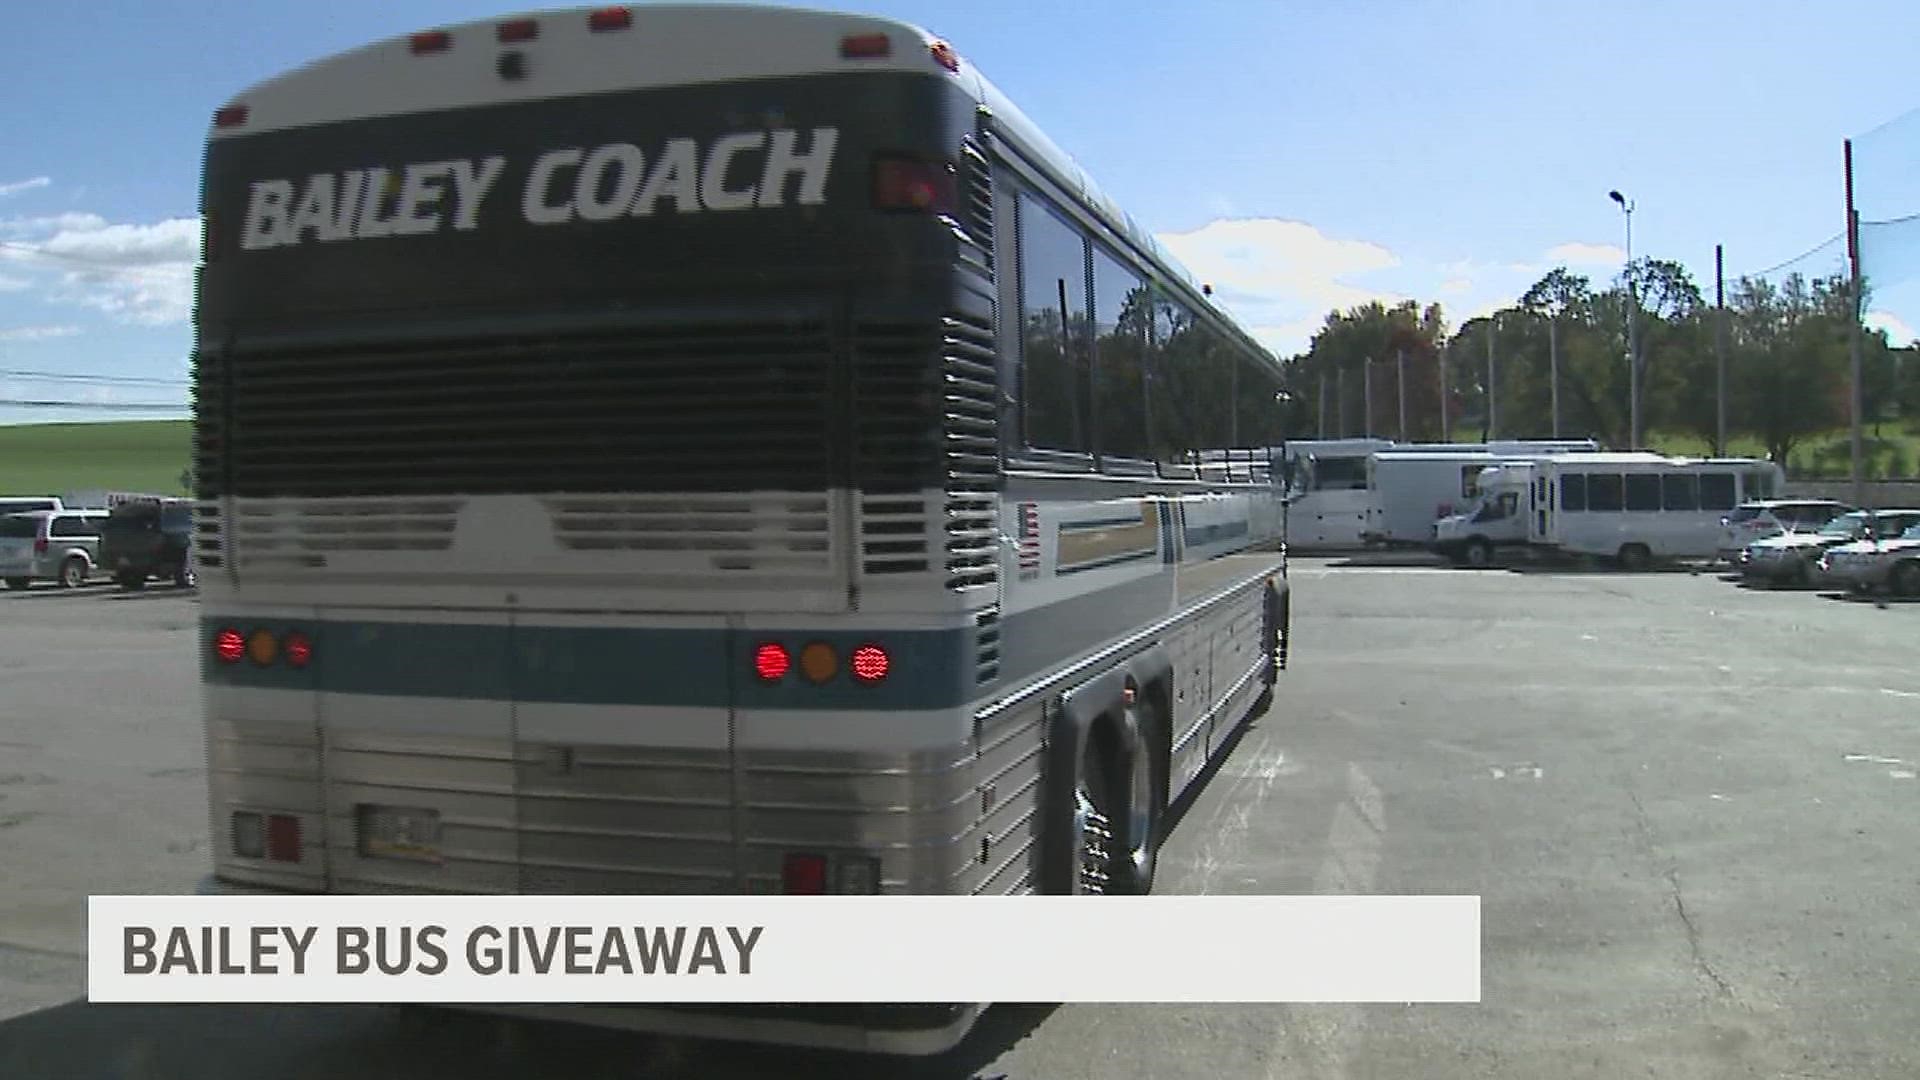 Servants, Inc. is one of three nonprofits with a chance to win a free bus.